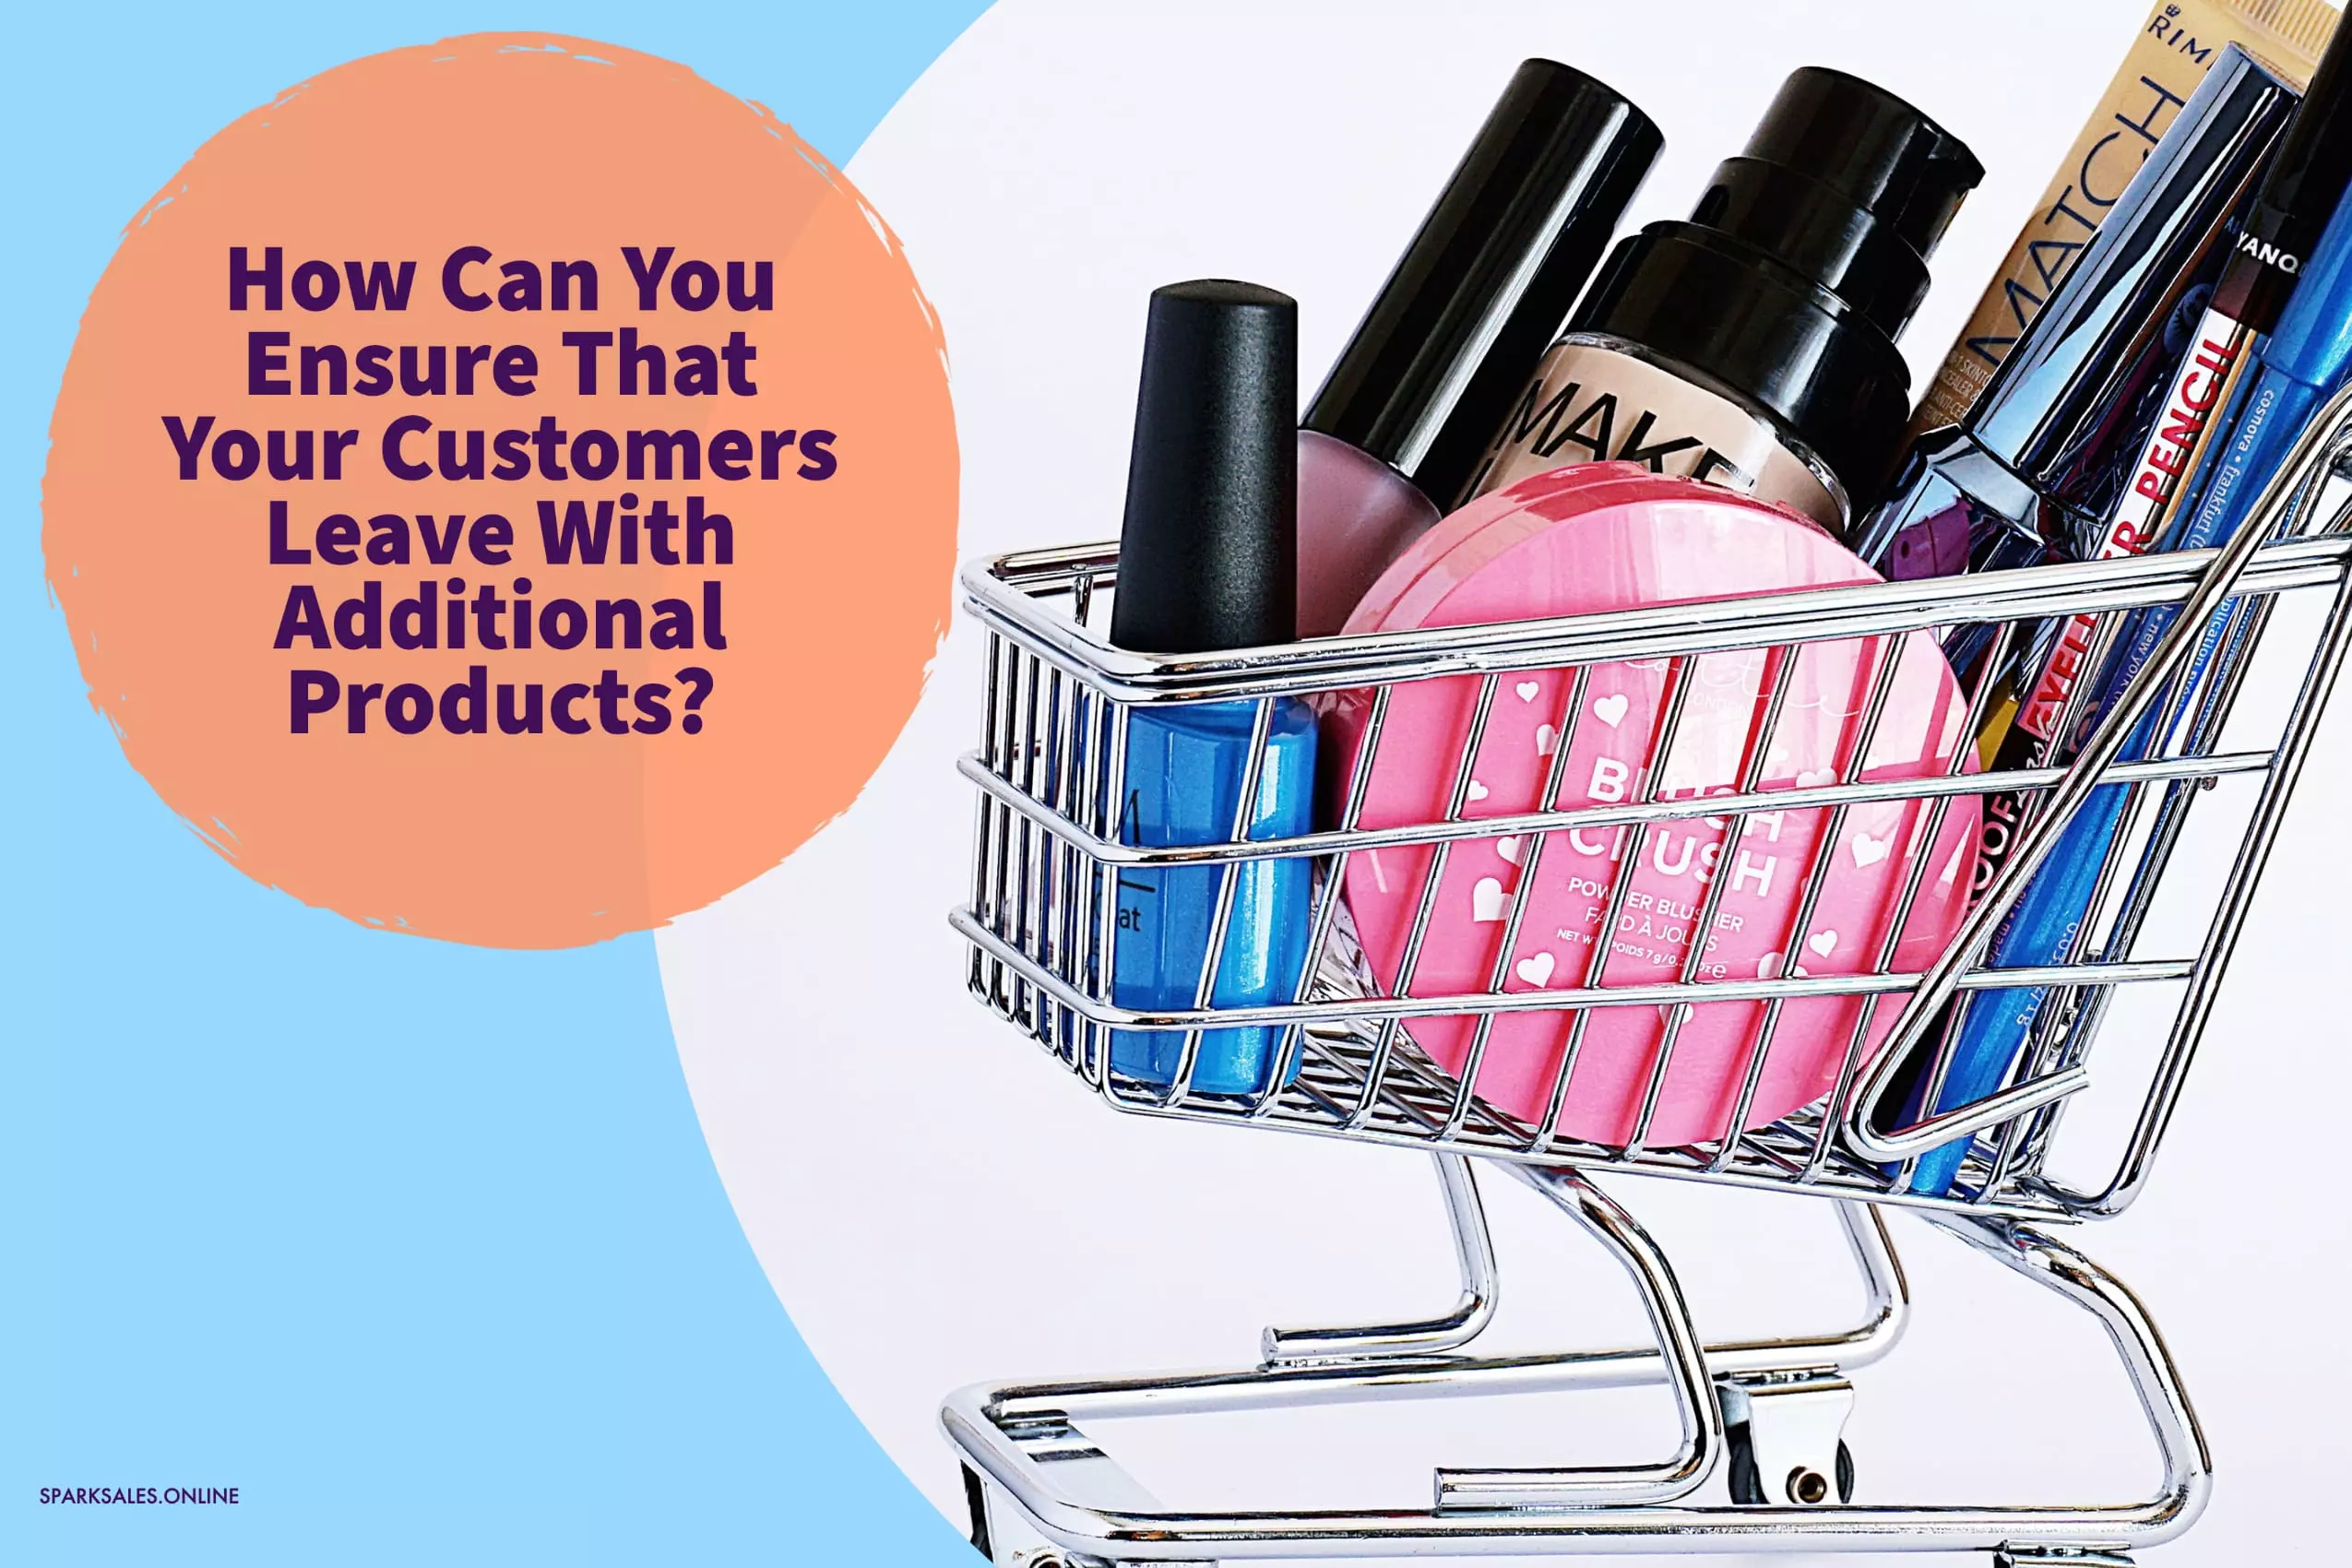 How Can You Ensure That Your Customers Leave With Additional Products?